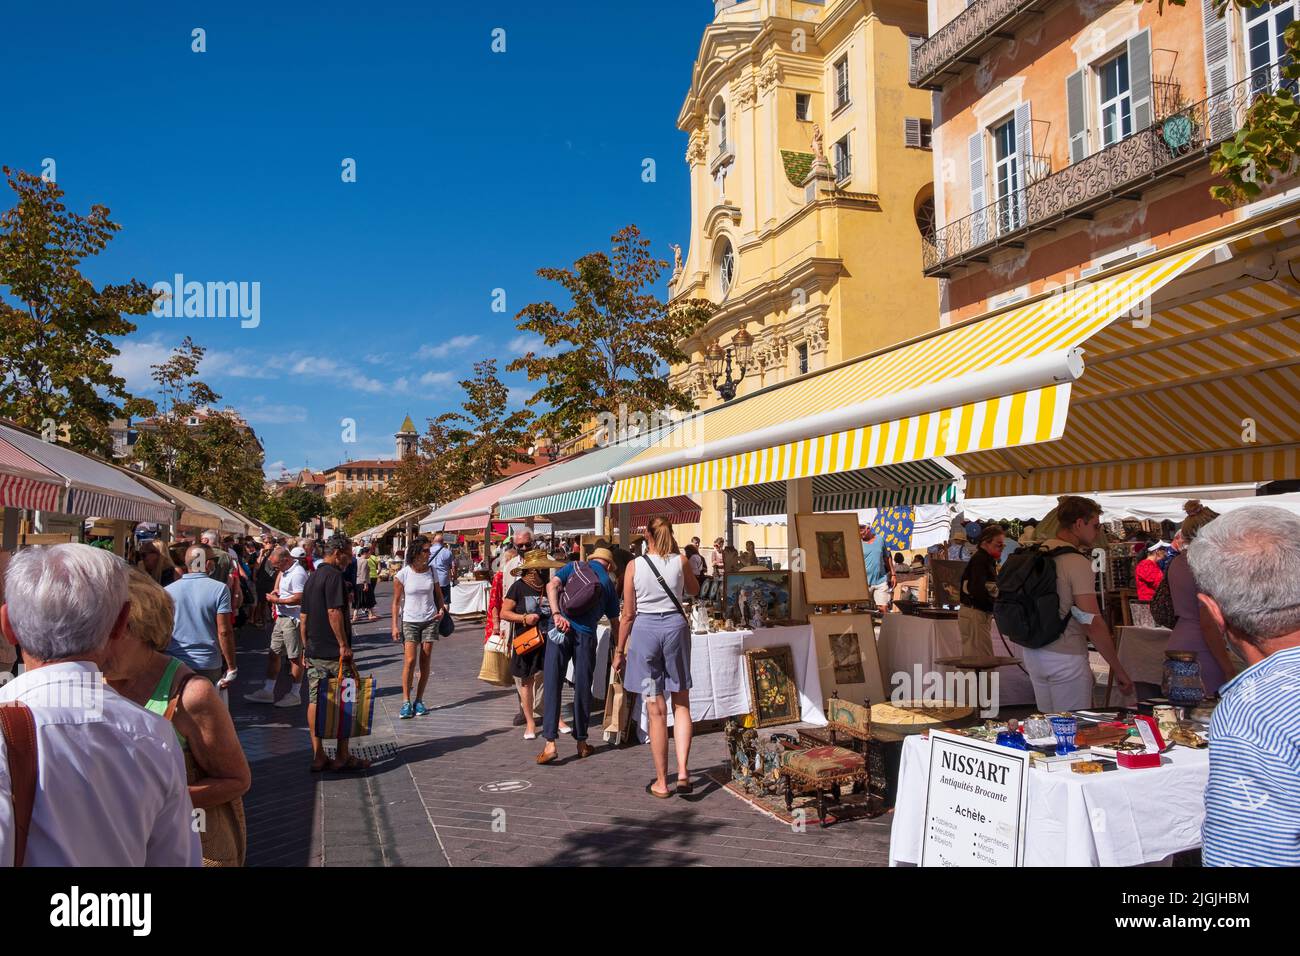 Monday Antiques market 'brocante' with shoppers, Nice, Cote D' Azur, France Stock Photo